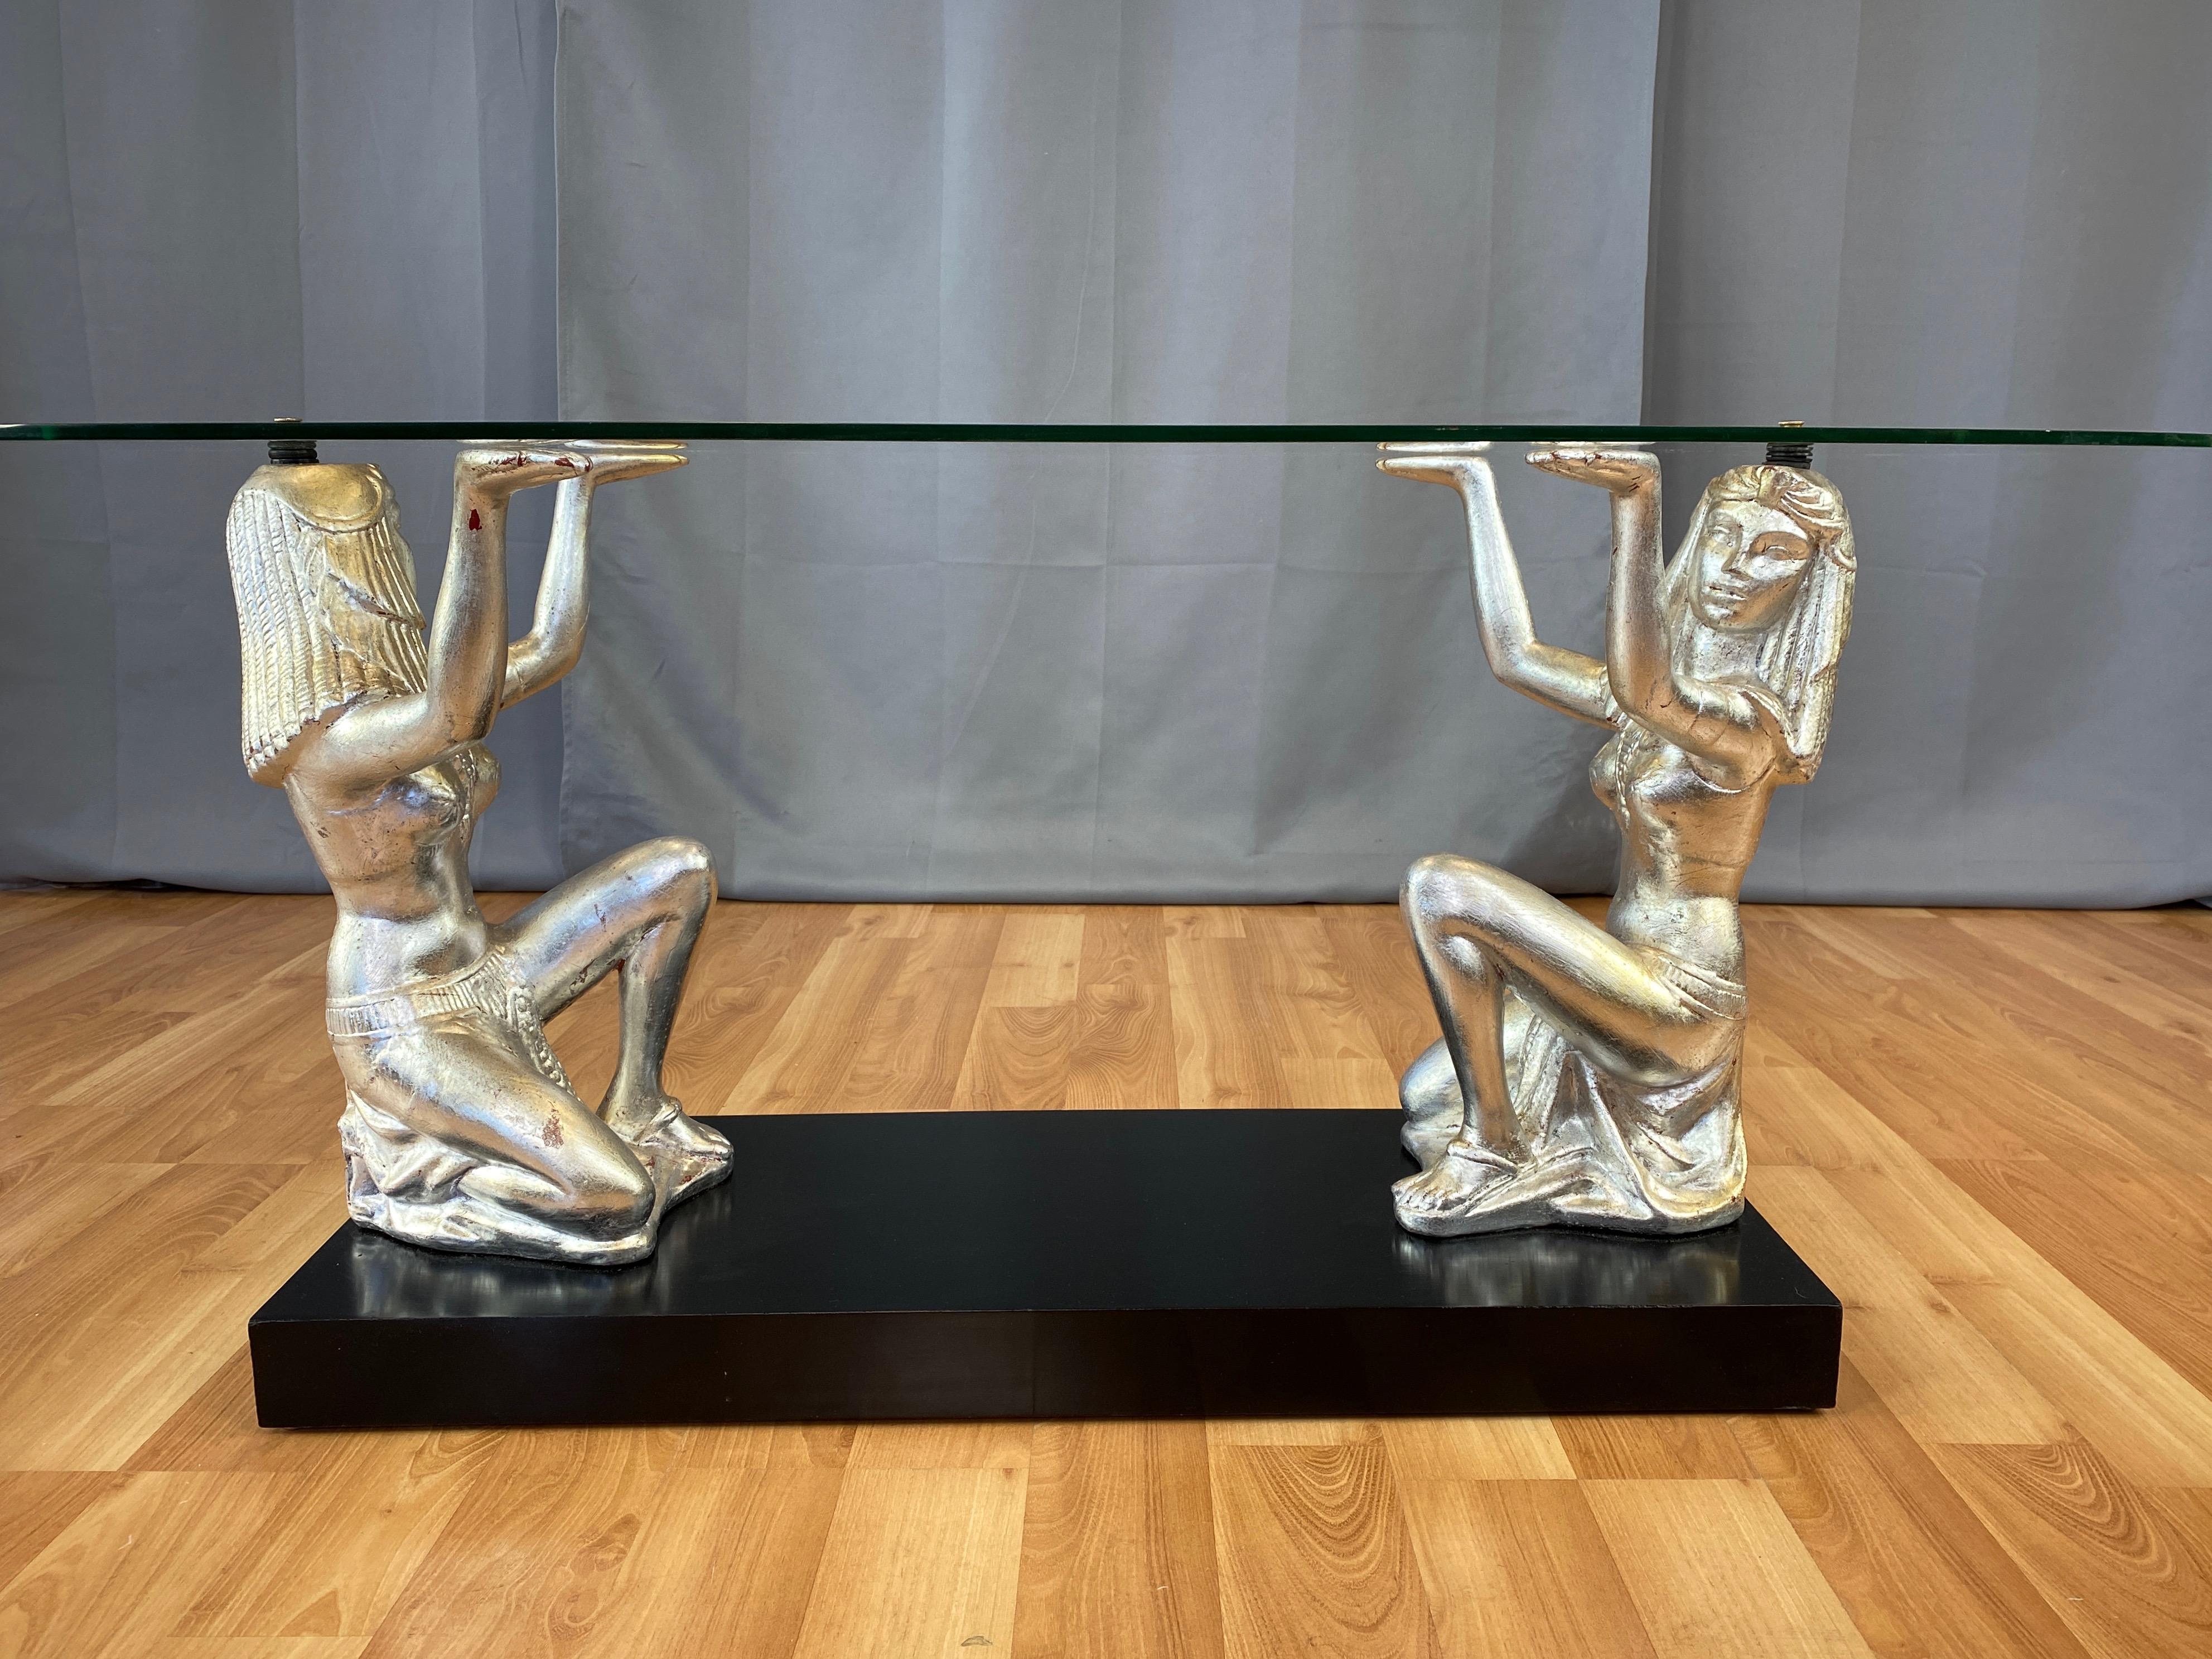 California Lamps & Shades Co. Silvered Egyptian Figures Glass Coffee Table, 1951 For Sale 5